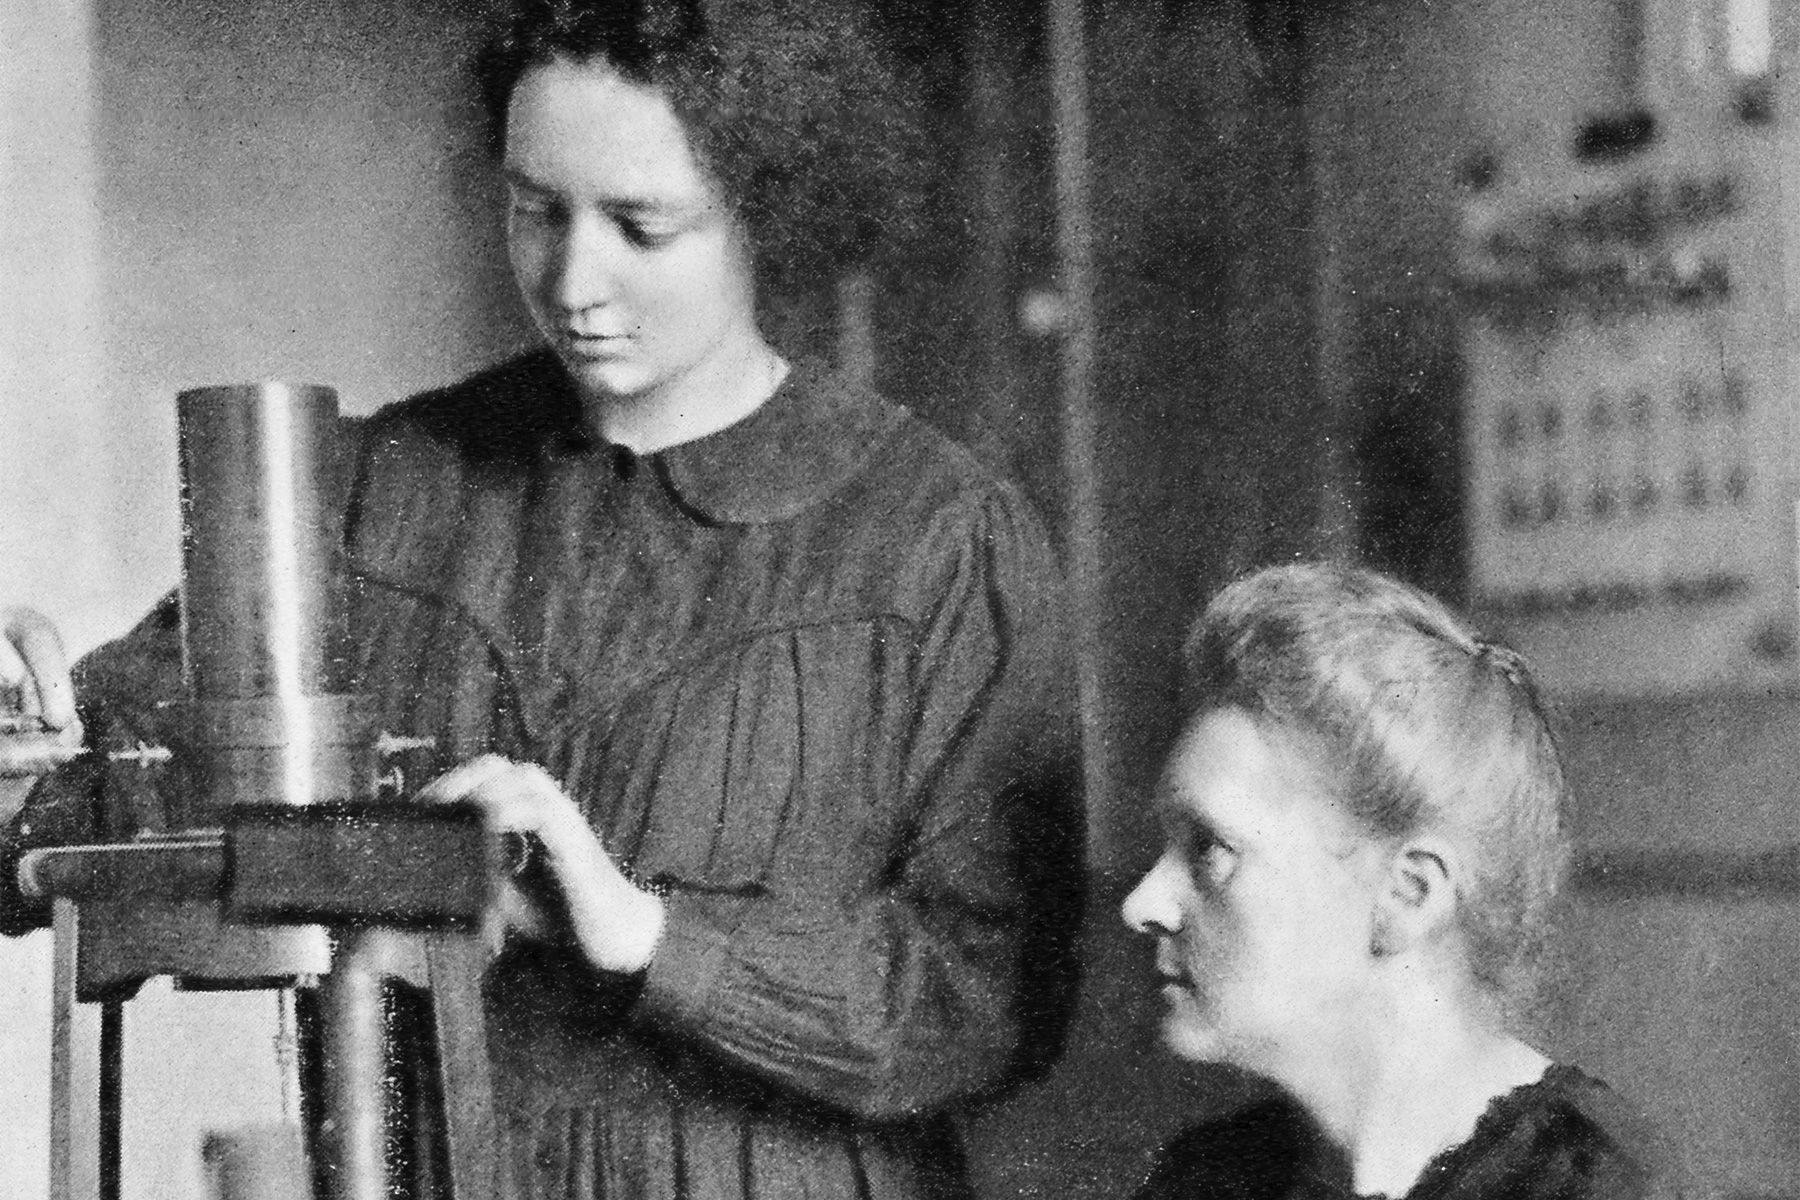 irene and marie curie, 1925, photographer unknown